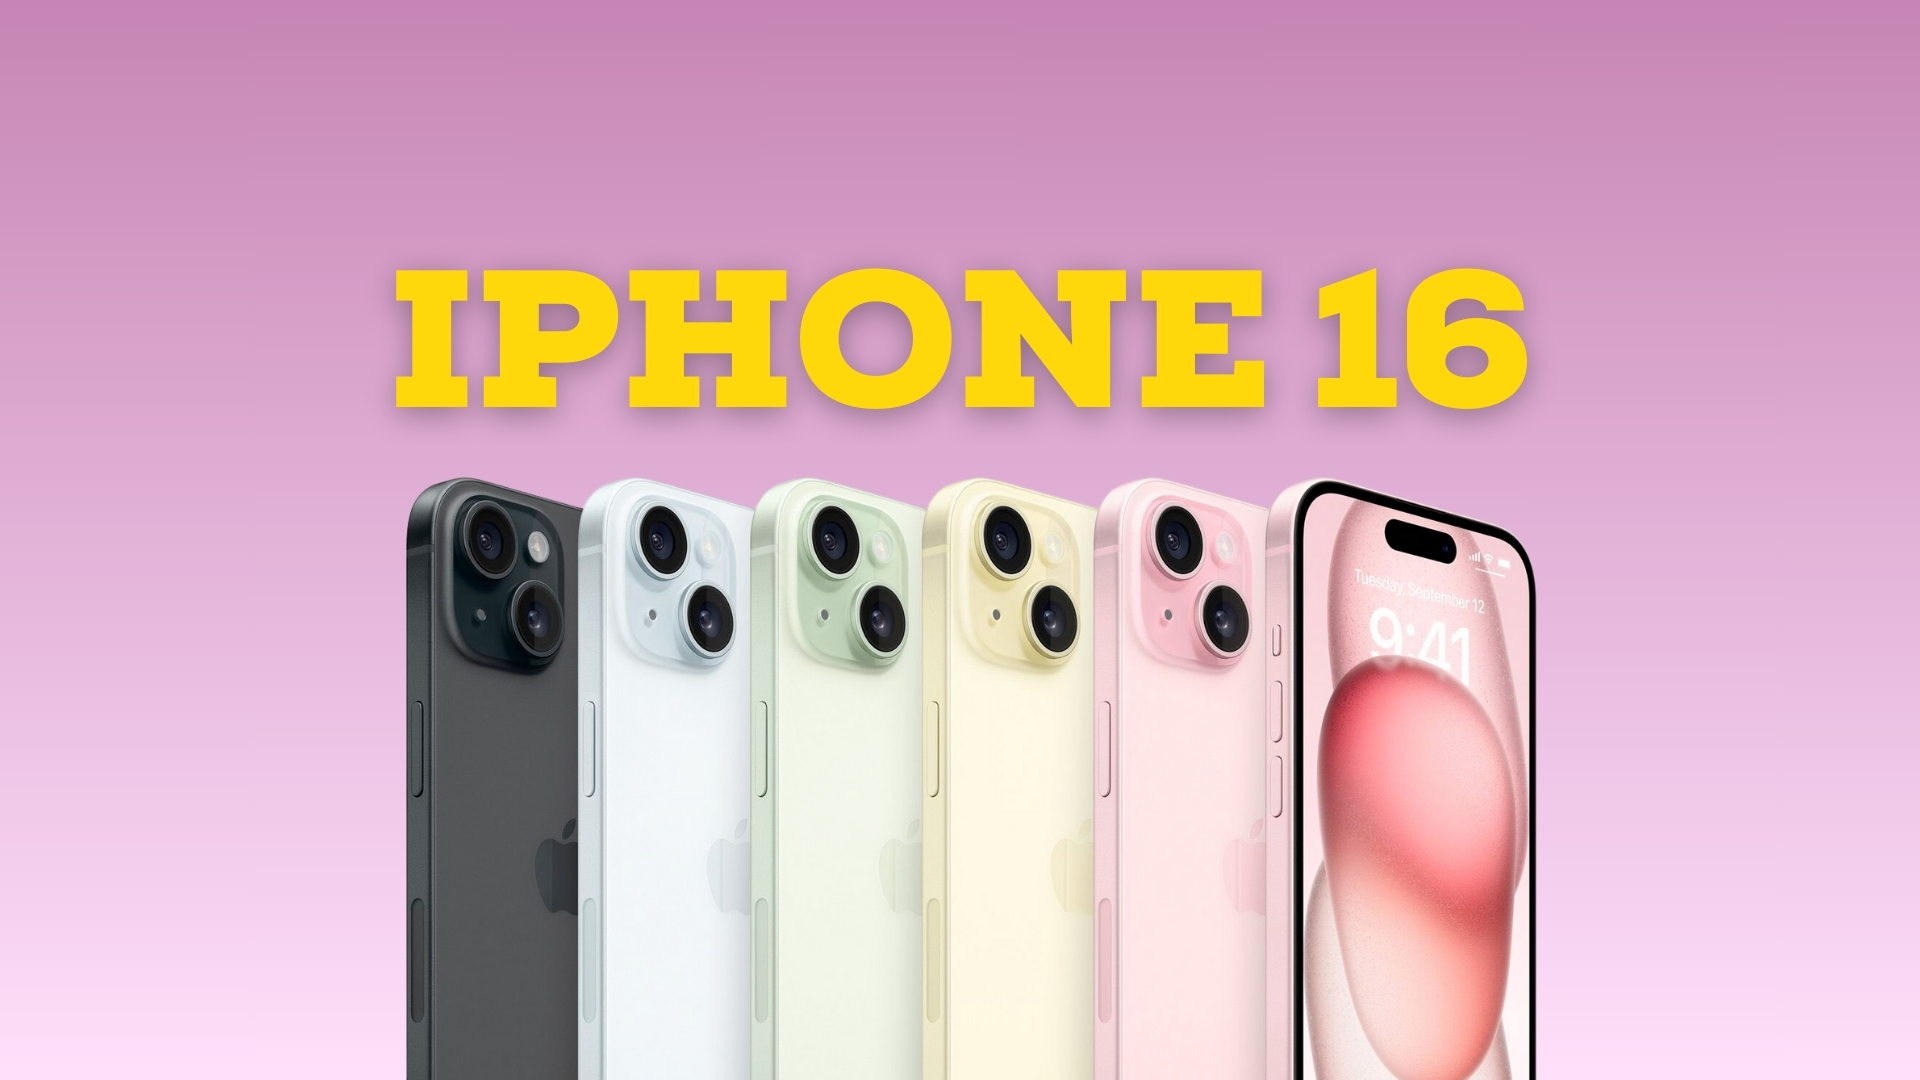 iPhone 16: Release date rumors, news, and more